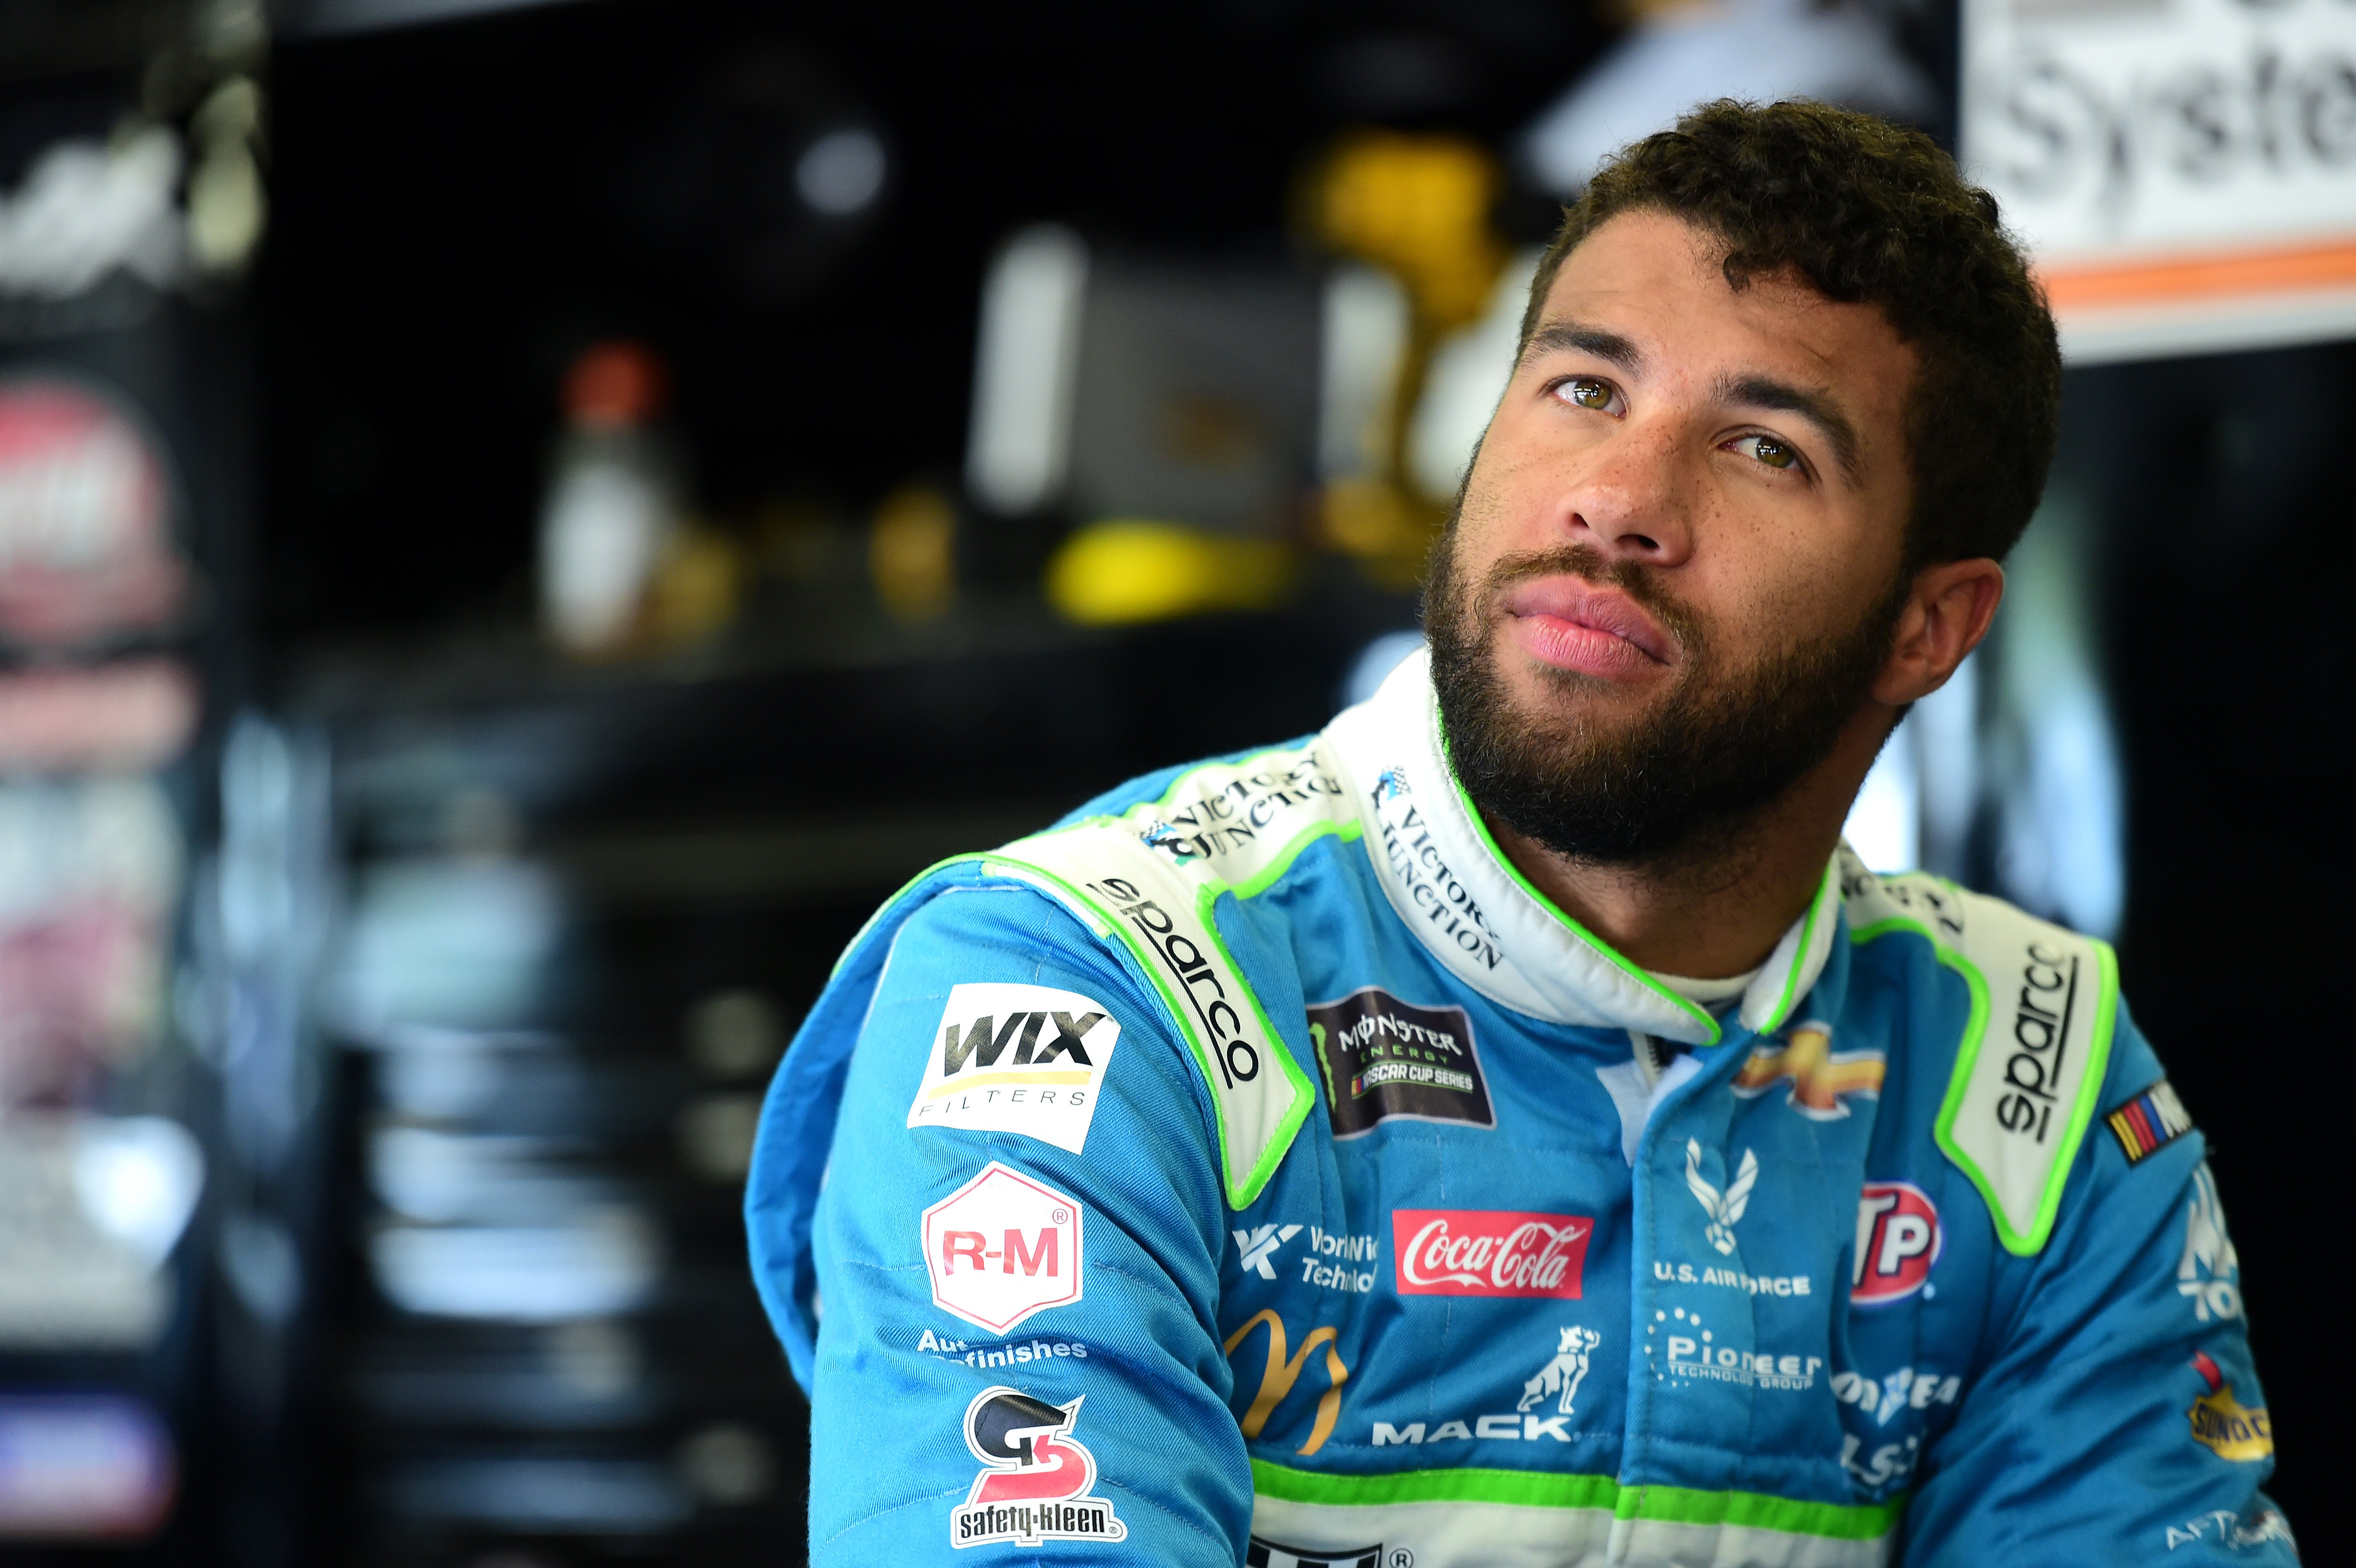 Bubba Wallace at New Hampshire Motor Speedway on July 20, 2019, in Loudon, New Hampshire. | Source: Getty Images. 